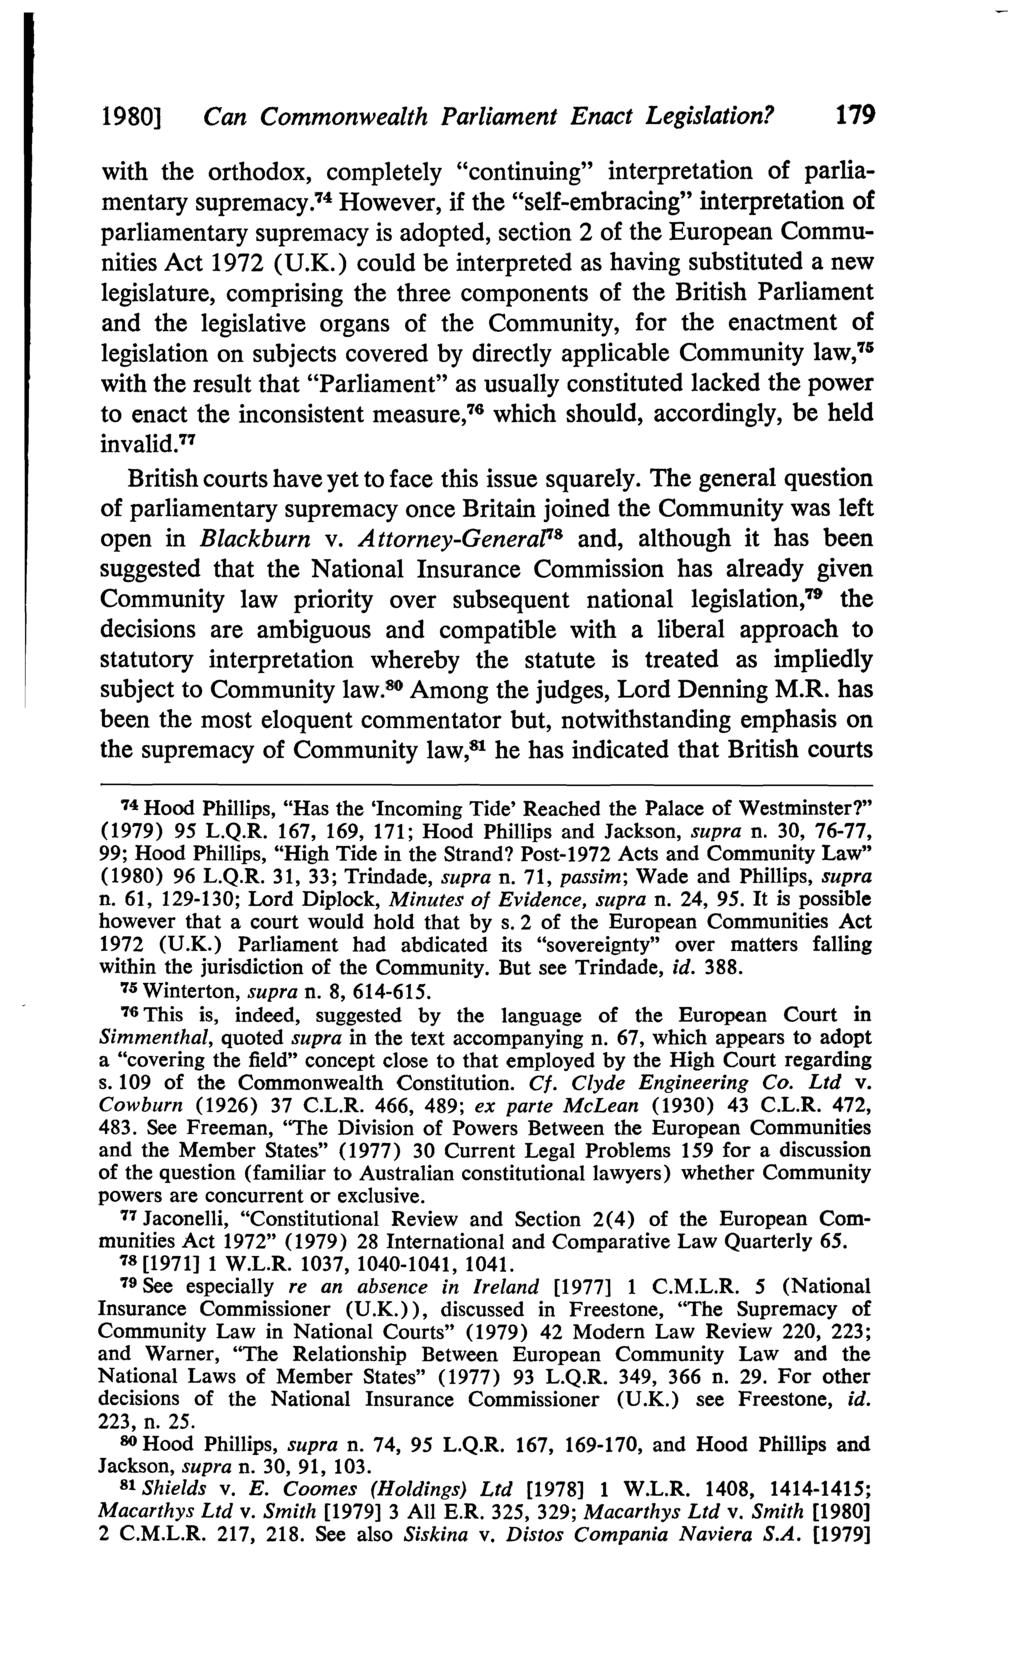 1980] Can Commonwealth Parliament Enact Legislation? 179 with the orthodox, completely "continuing" interpretation of parliamentary supremacy.